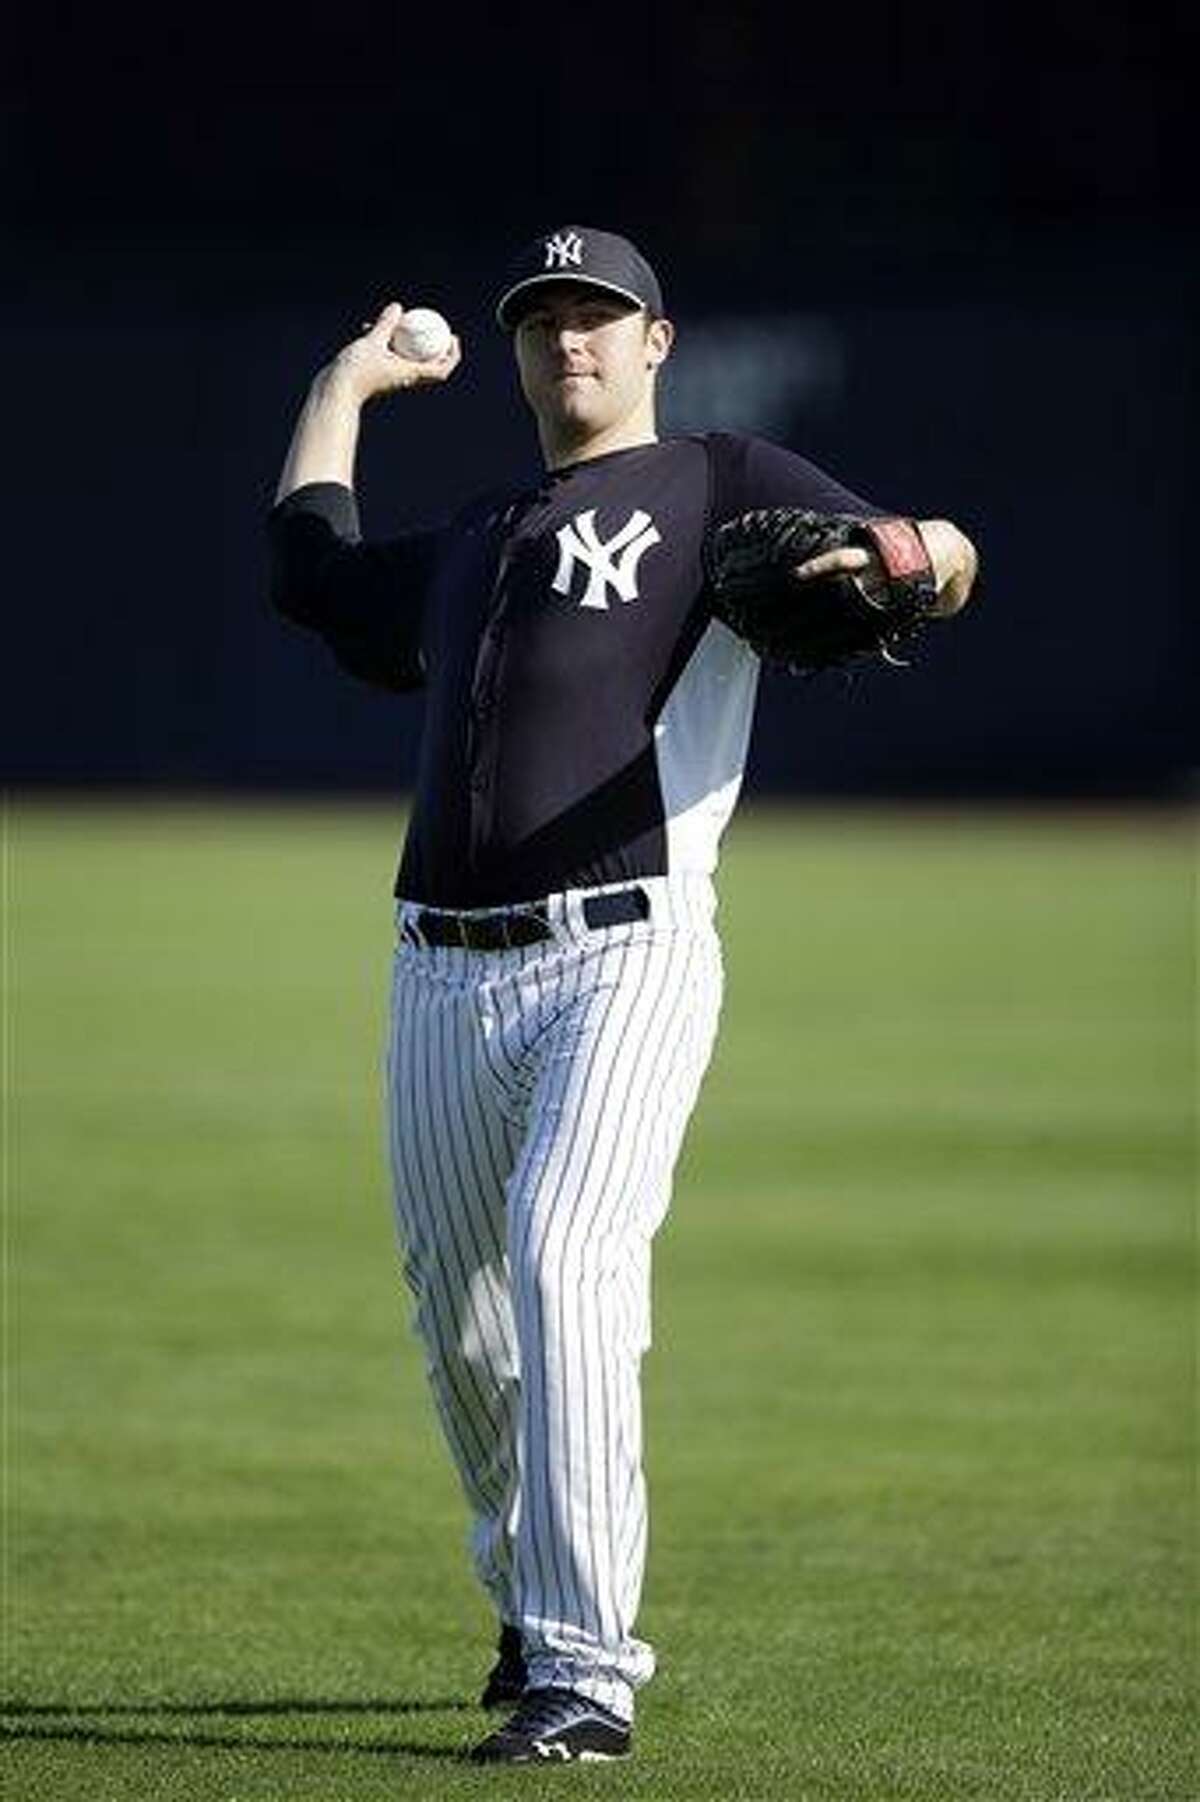 New York Yankees' Phil Hughes pitches during a workout at baseball spring training, Saturday, Feb. 16, 2013, in Tampa, Fla. (AP Photo/Matt Slocum)